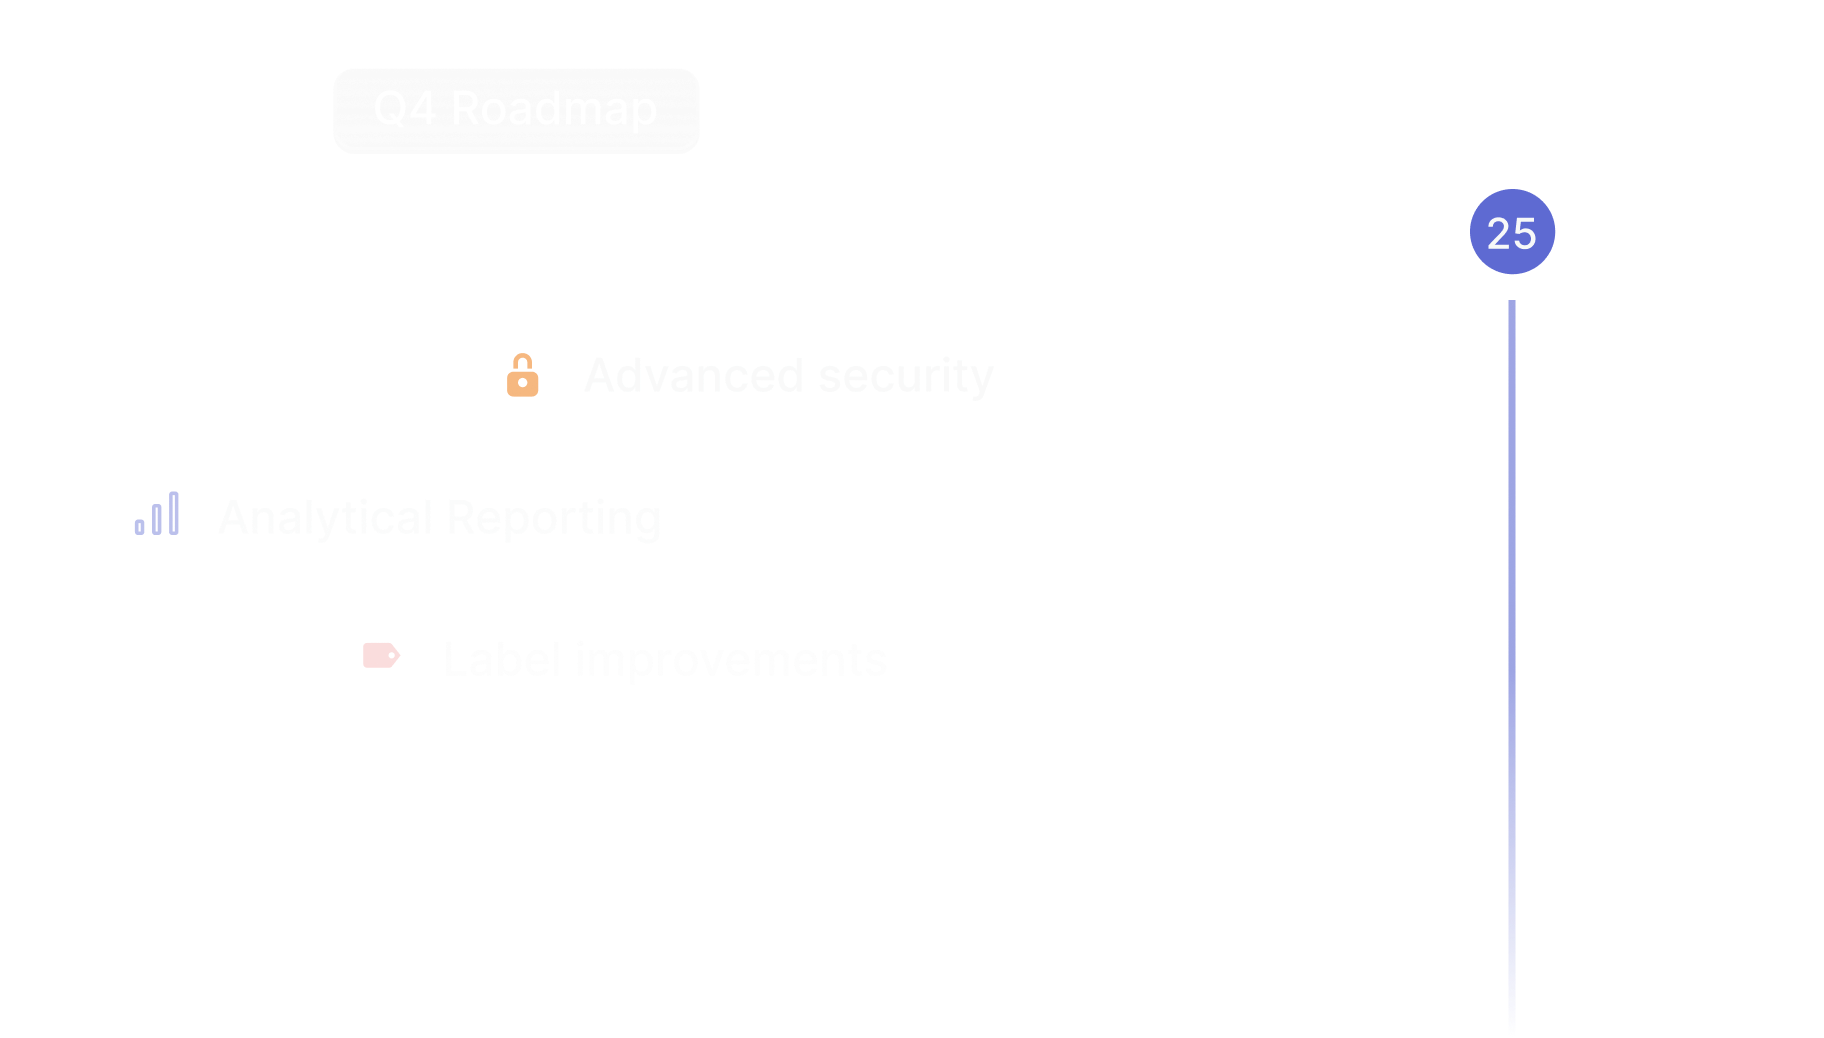 A list of projects on an example 2023 roadmap, including 'advanced security', 'analytical reporting', and 'Linear 2022 Release'. Wonder what that last one could be.